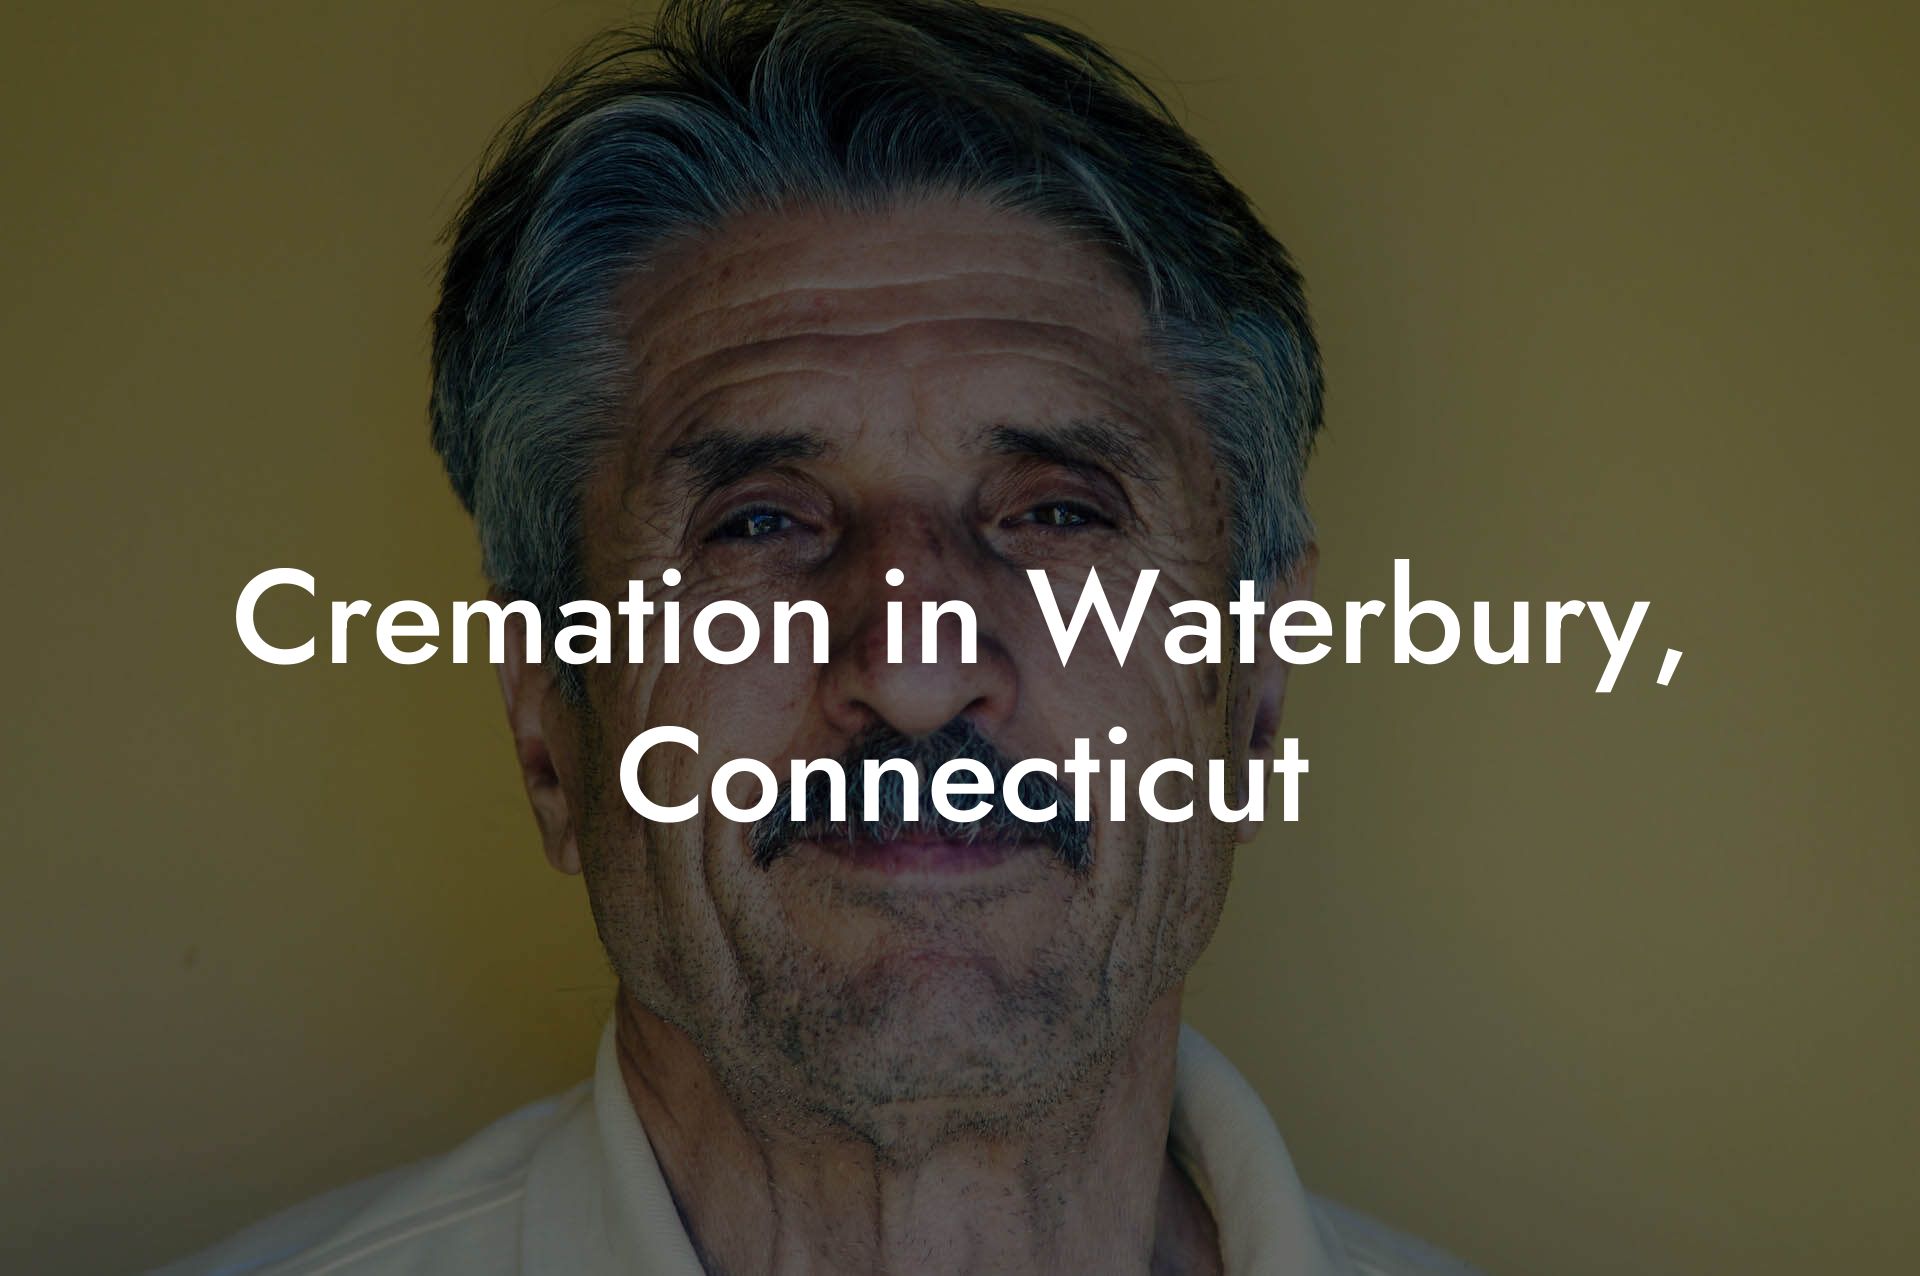 Cremation in Waterbury, Connecticut